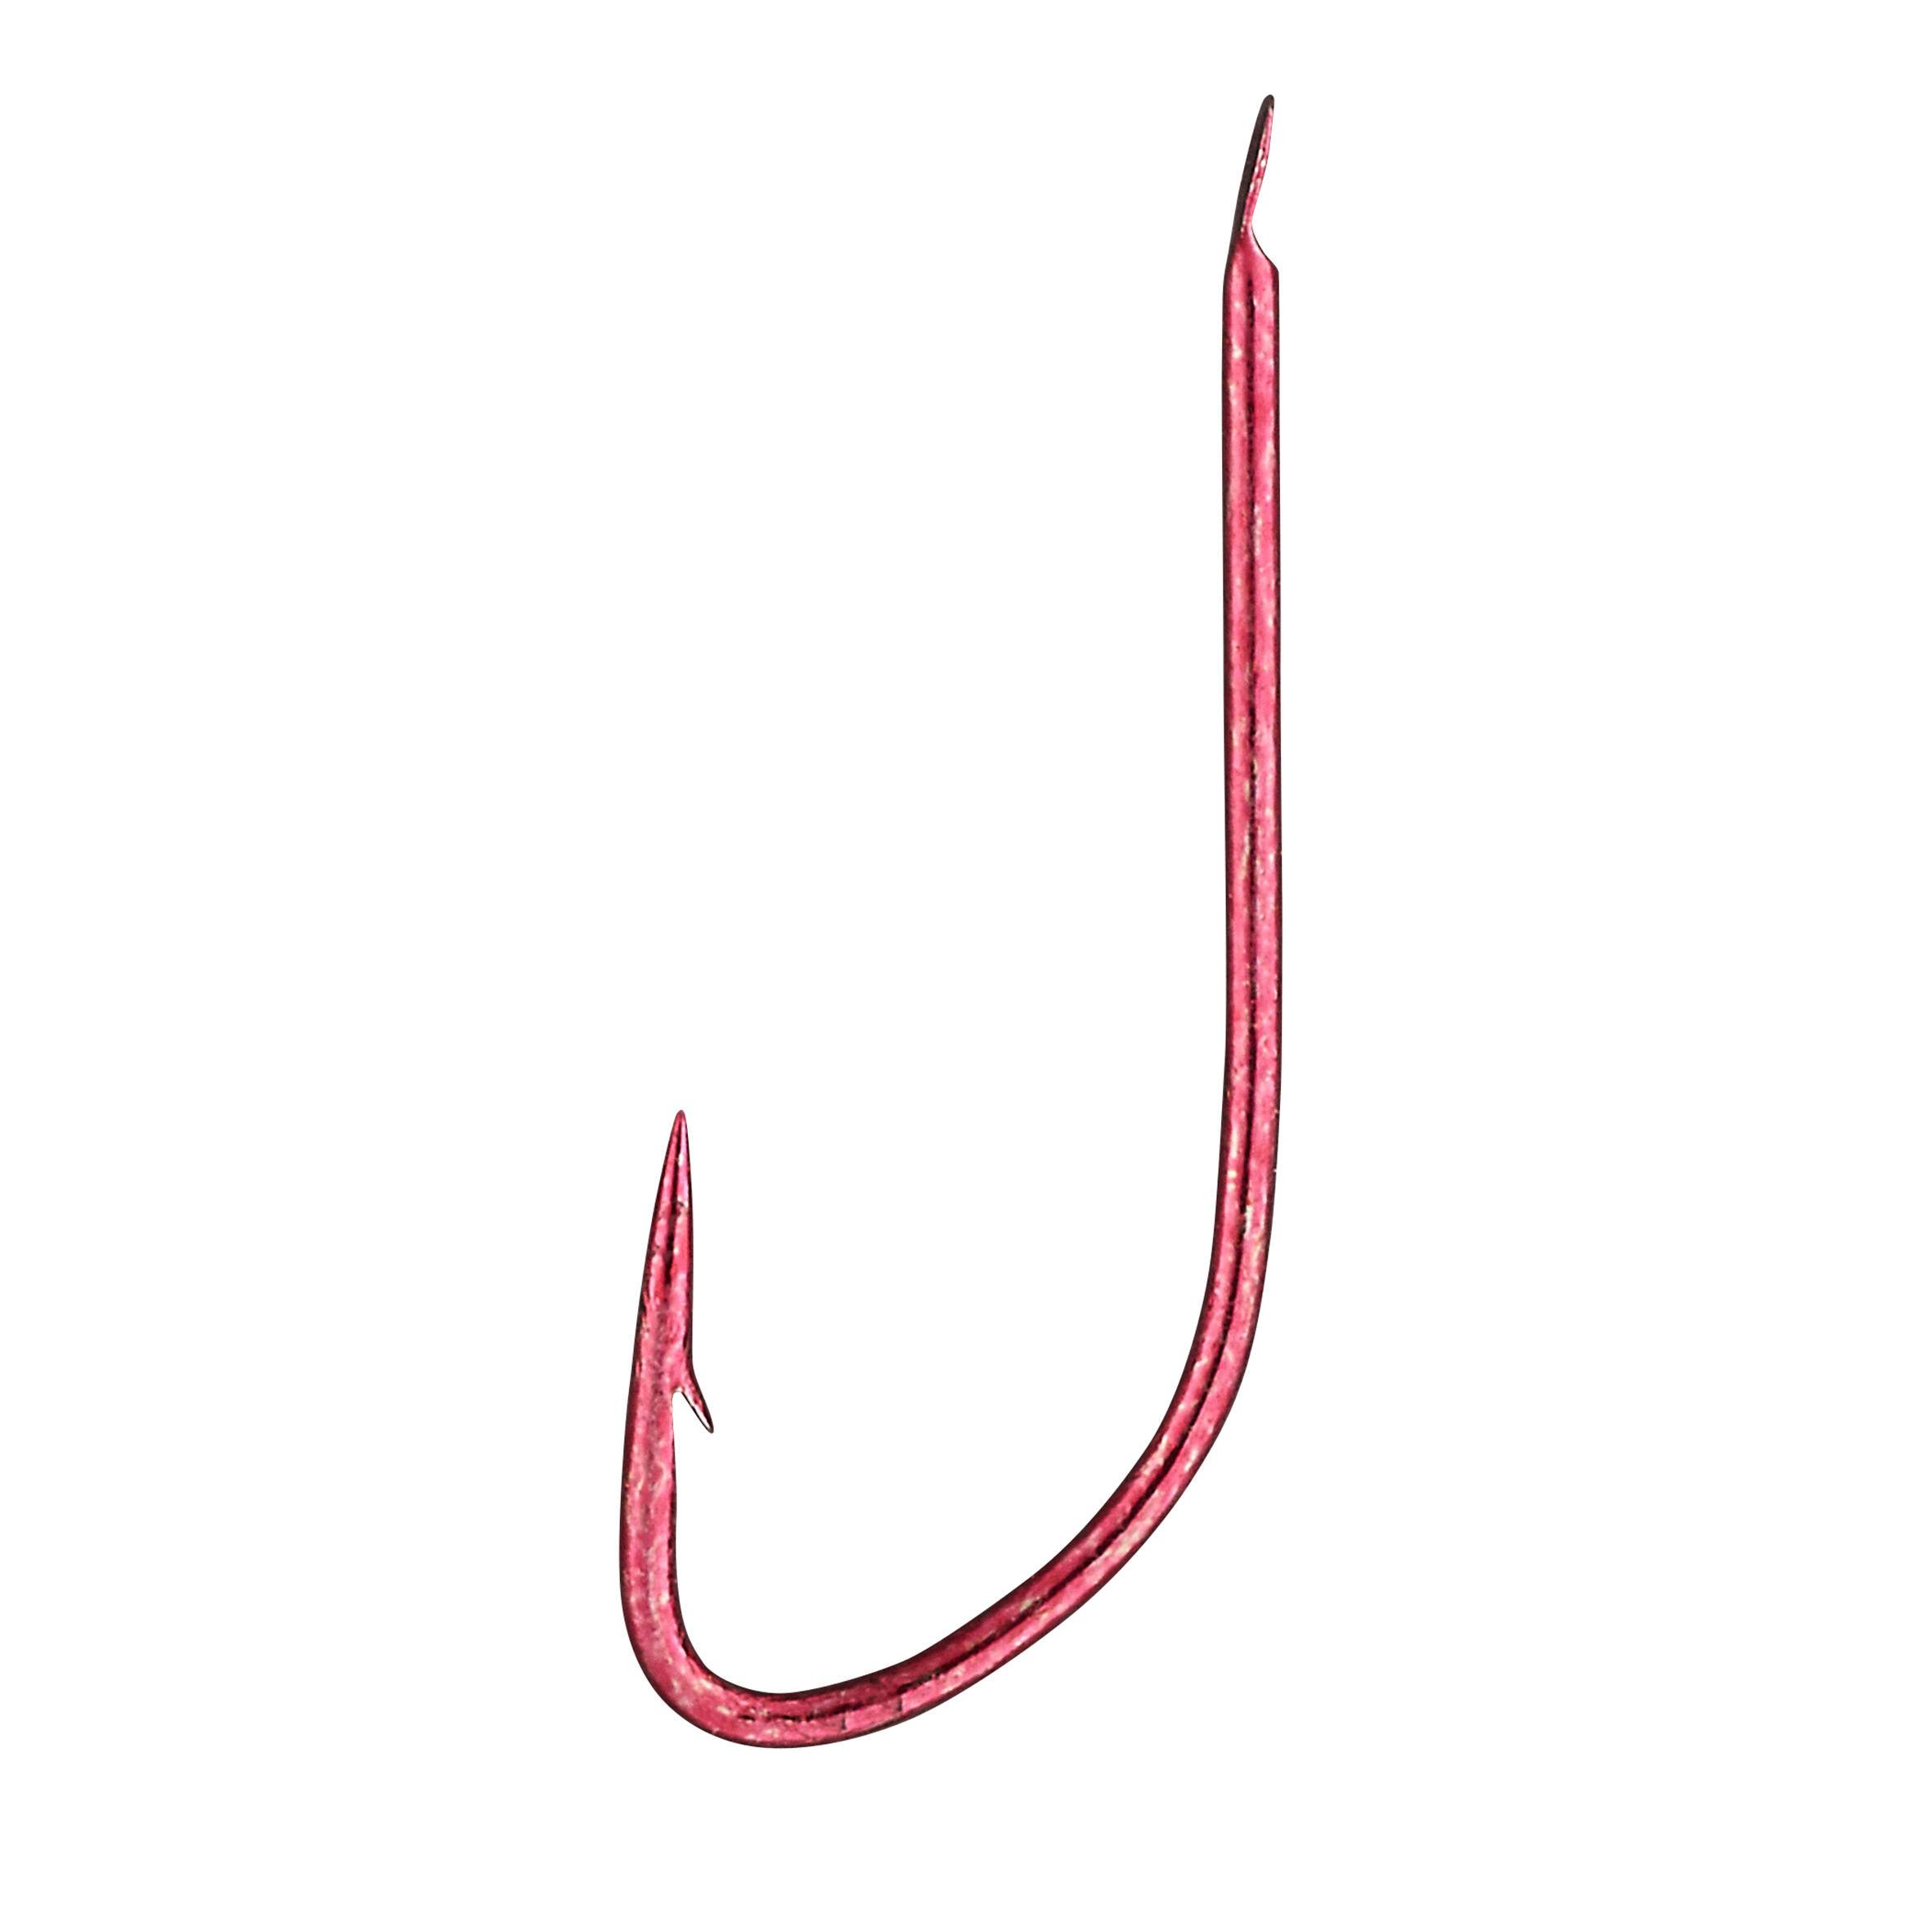 SINGLE RED UNMOUNTED HOOK PA HK 2 X10  FOR STILL FISHING 3/16